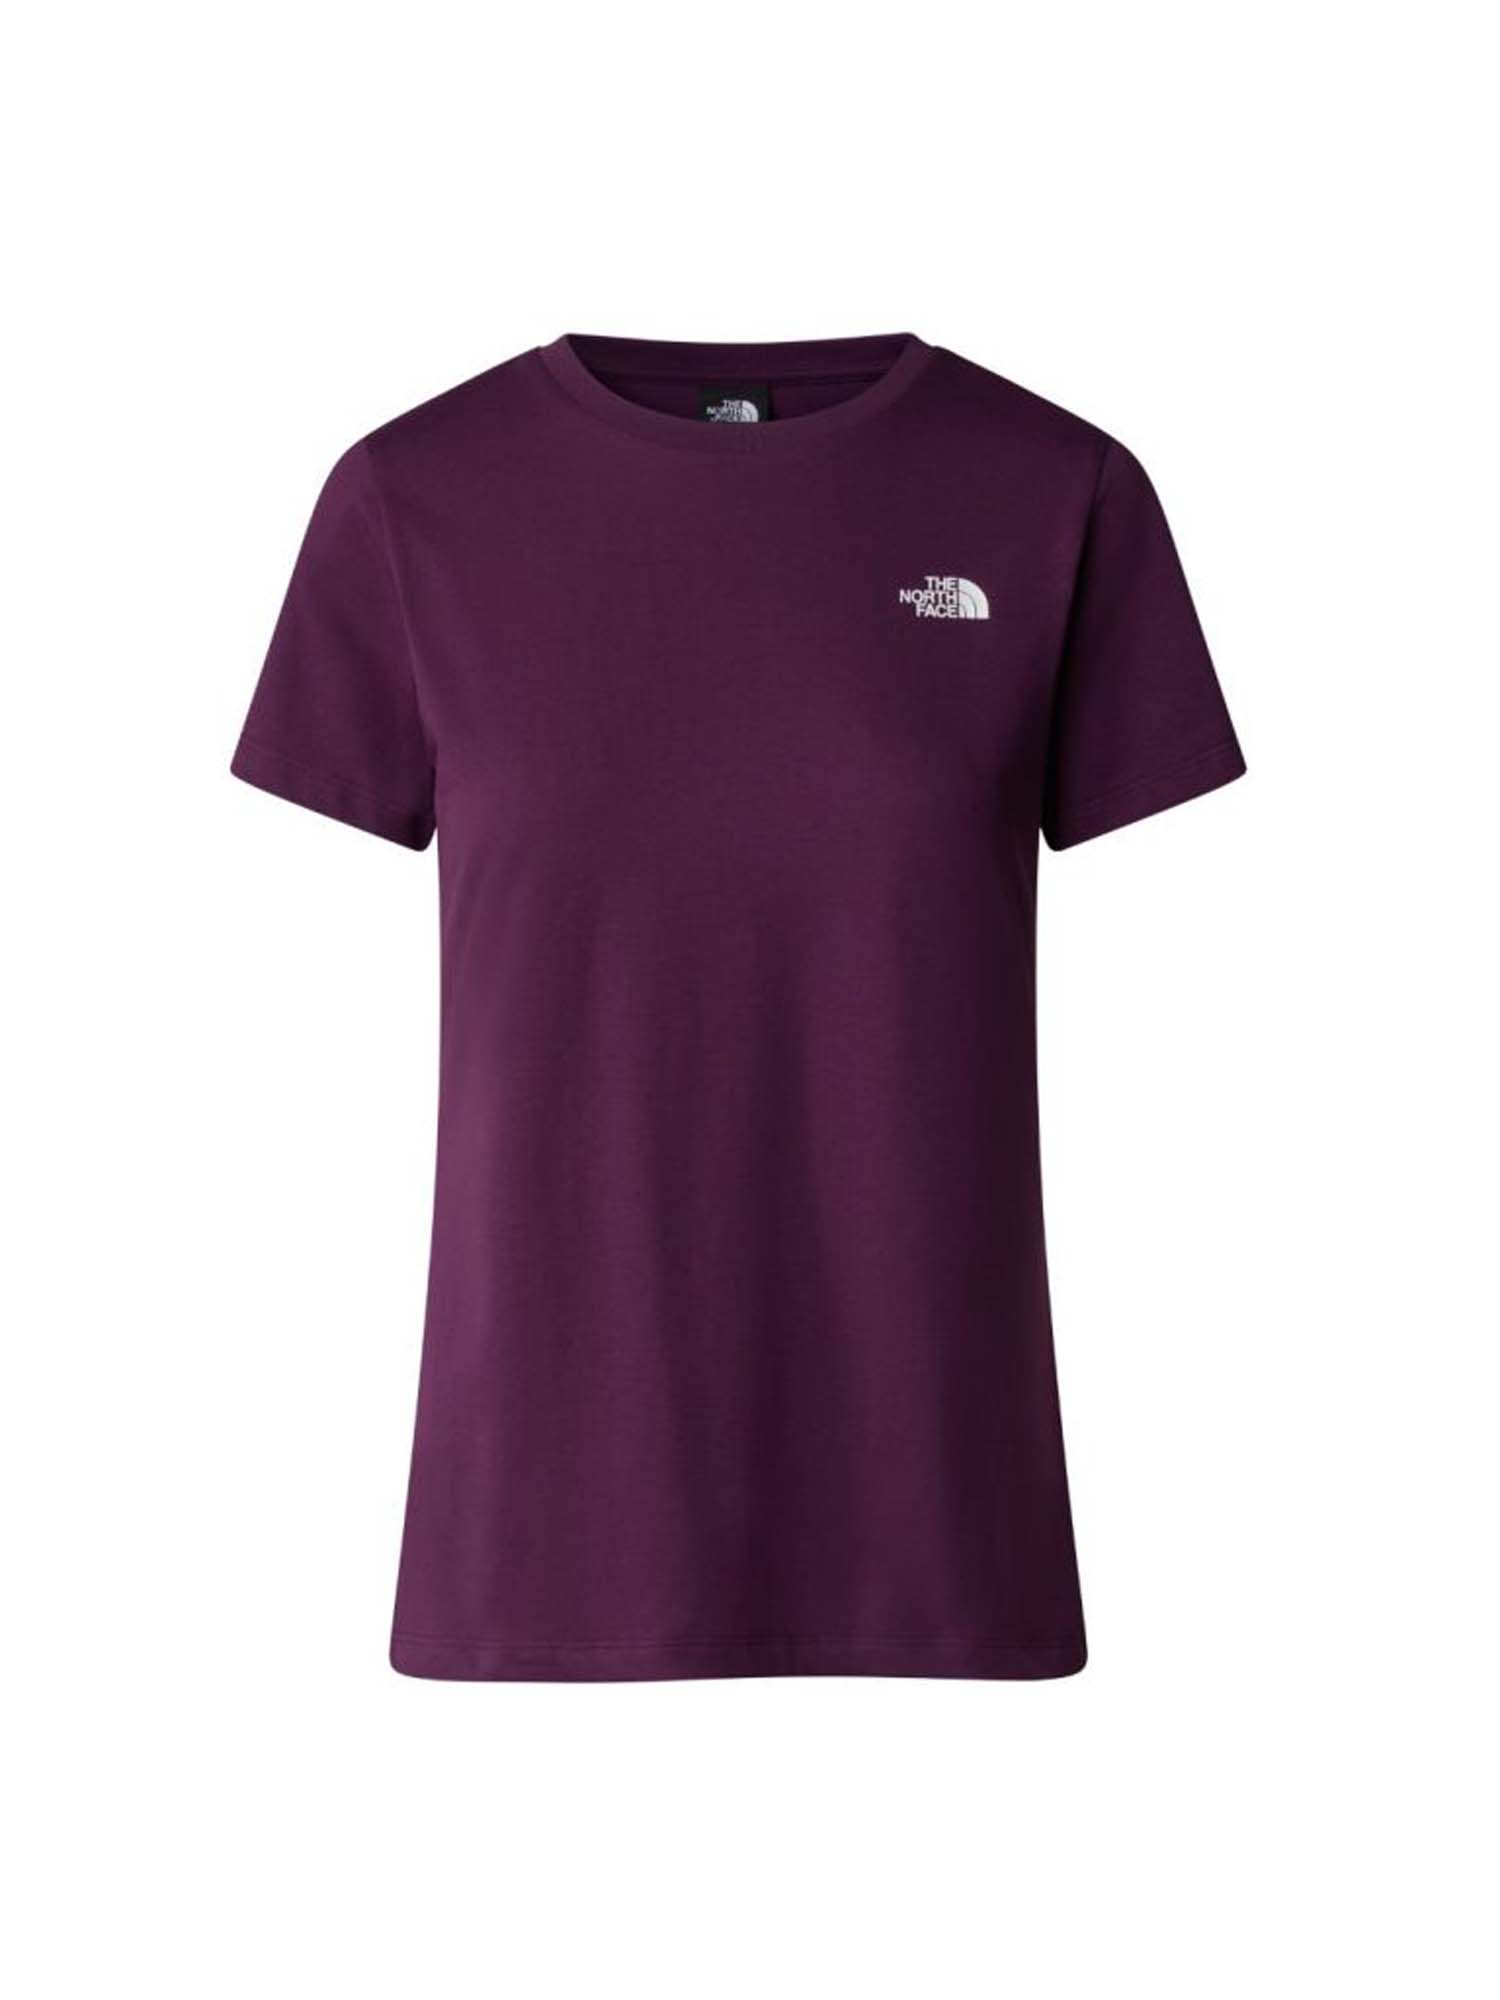 THE NORTH FACE W simple dome tee